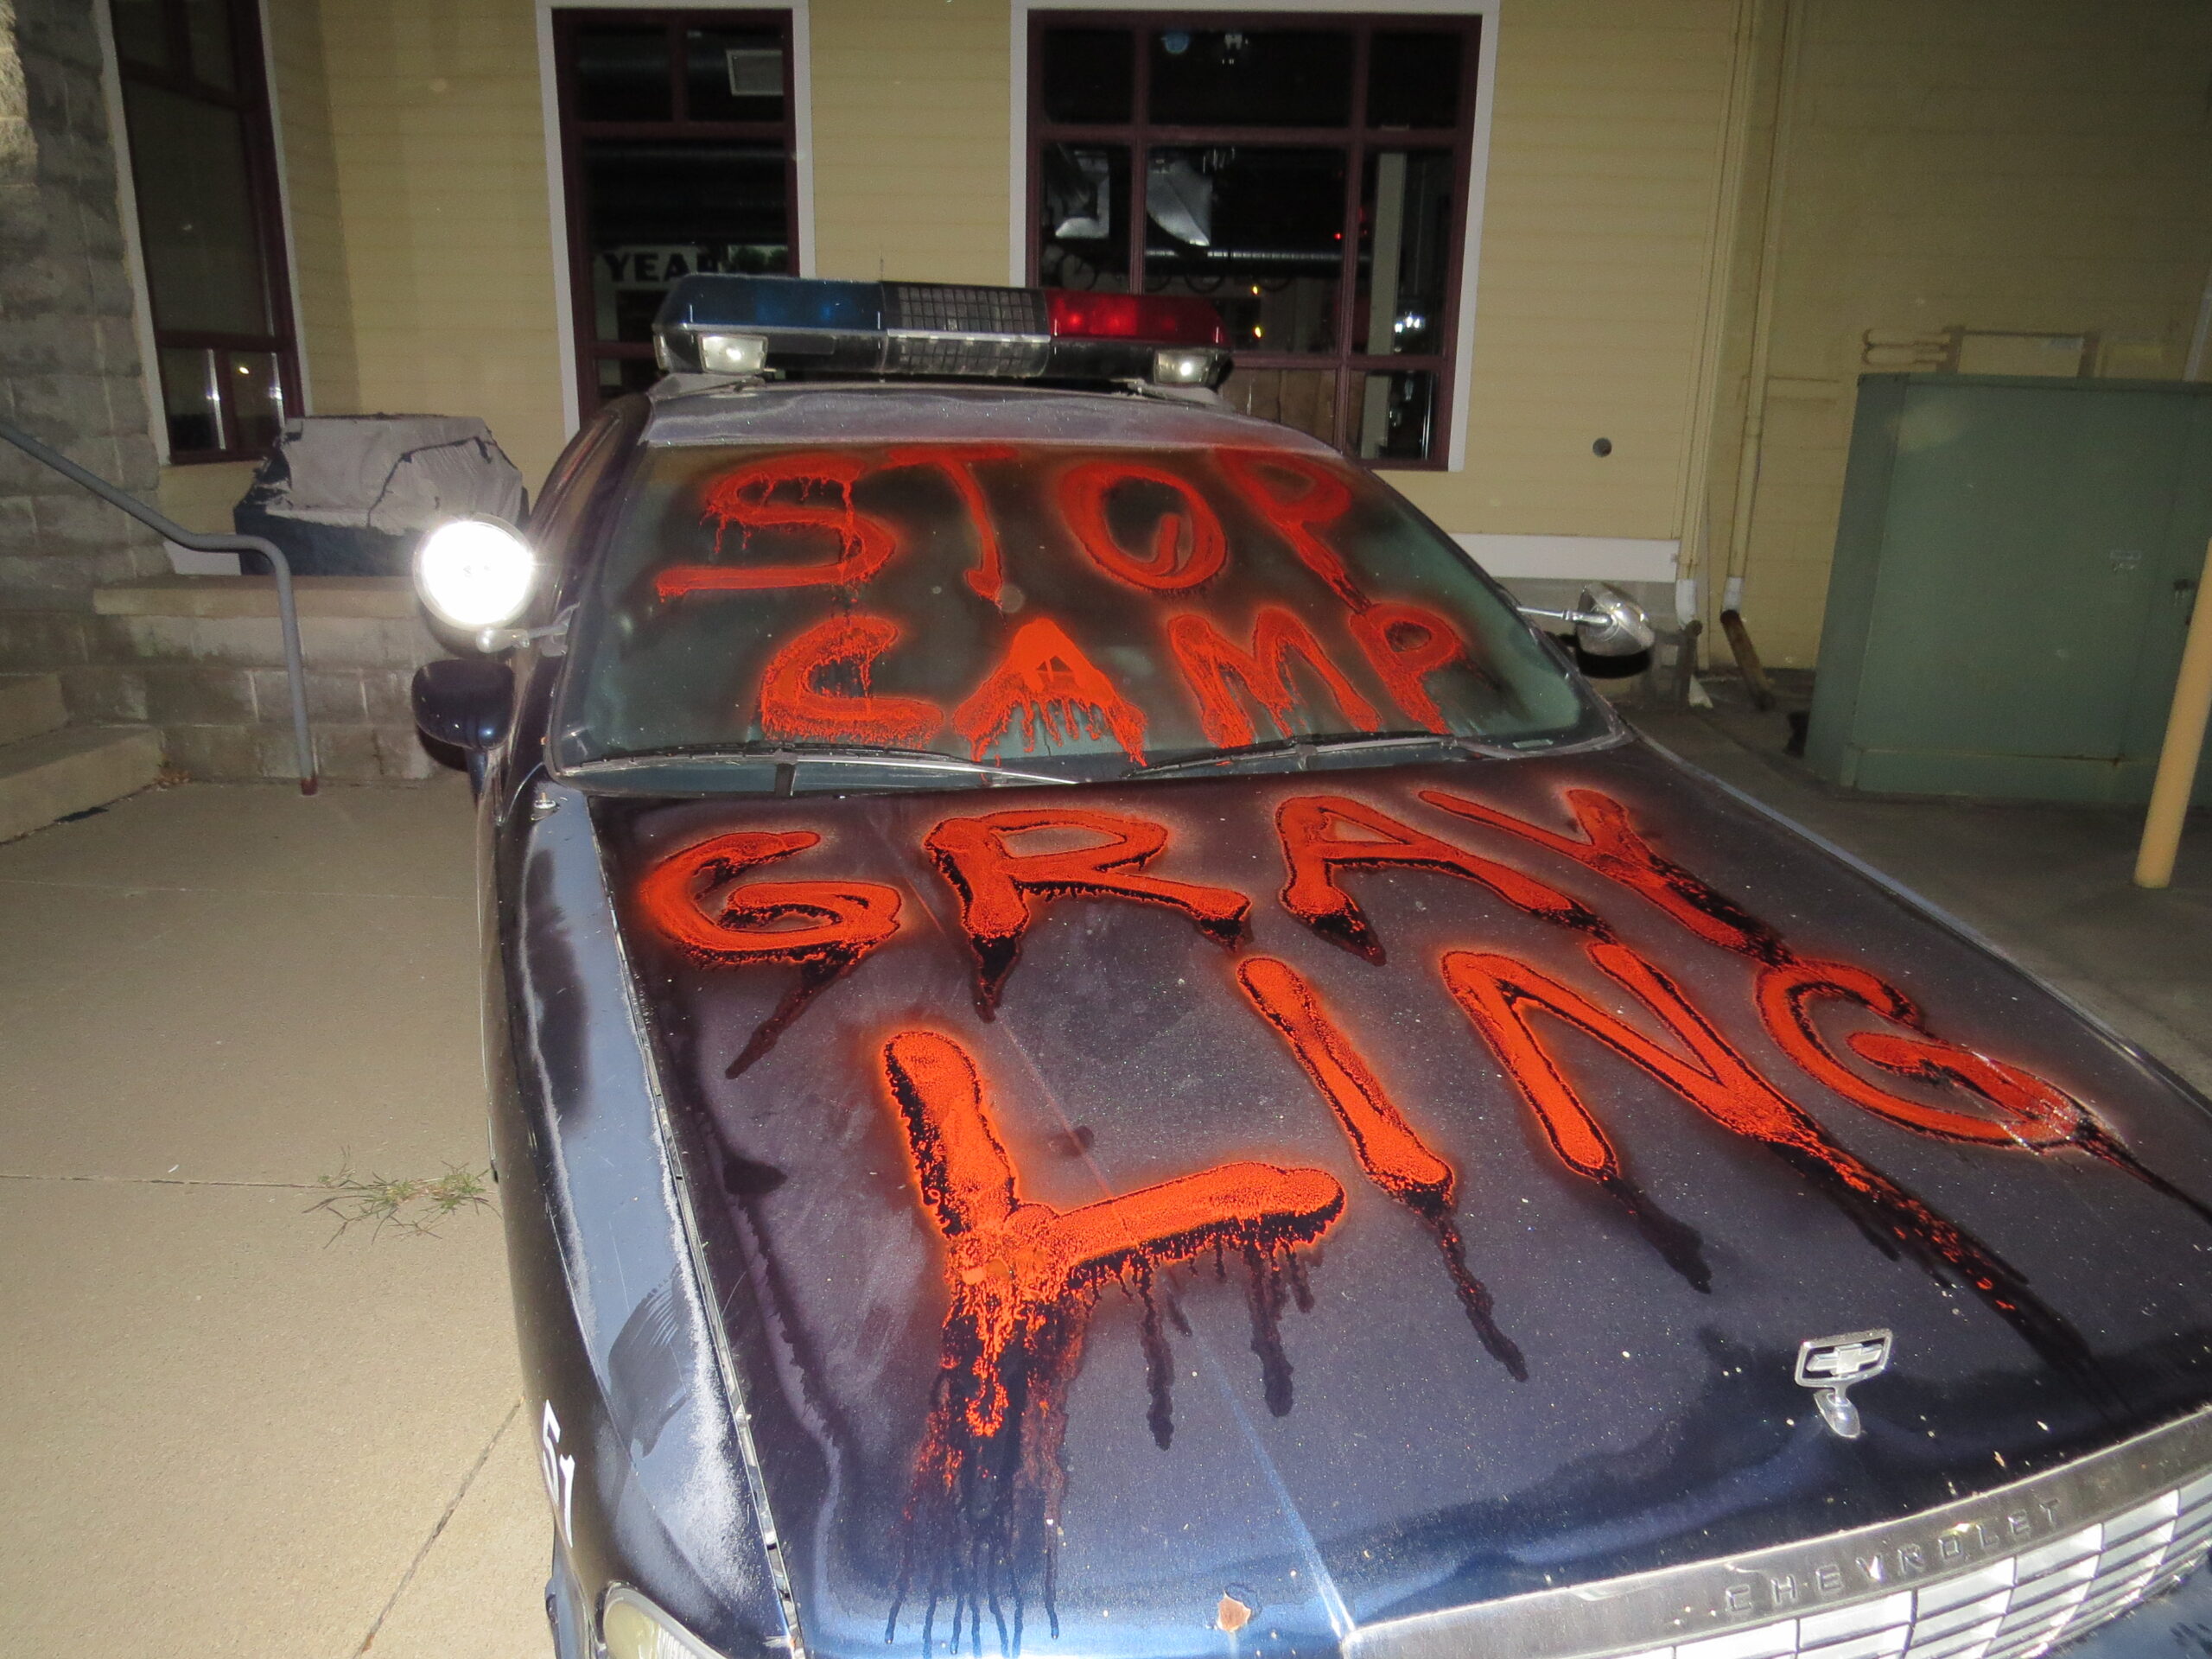 A police car is spray painted "STOP CAMP GRAYLING" in red spray paint.